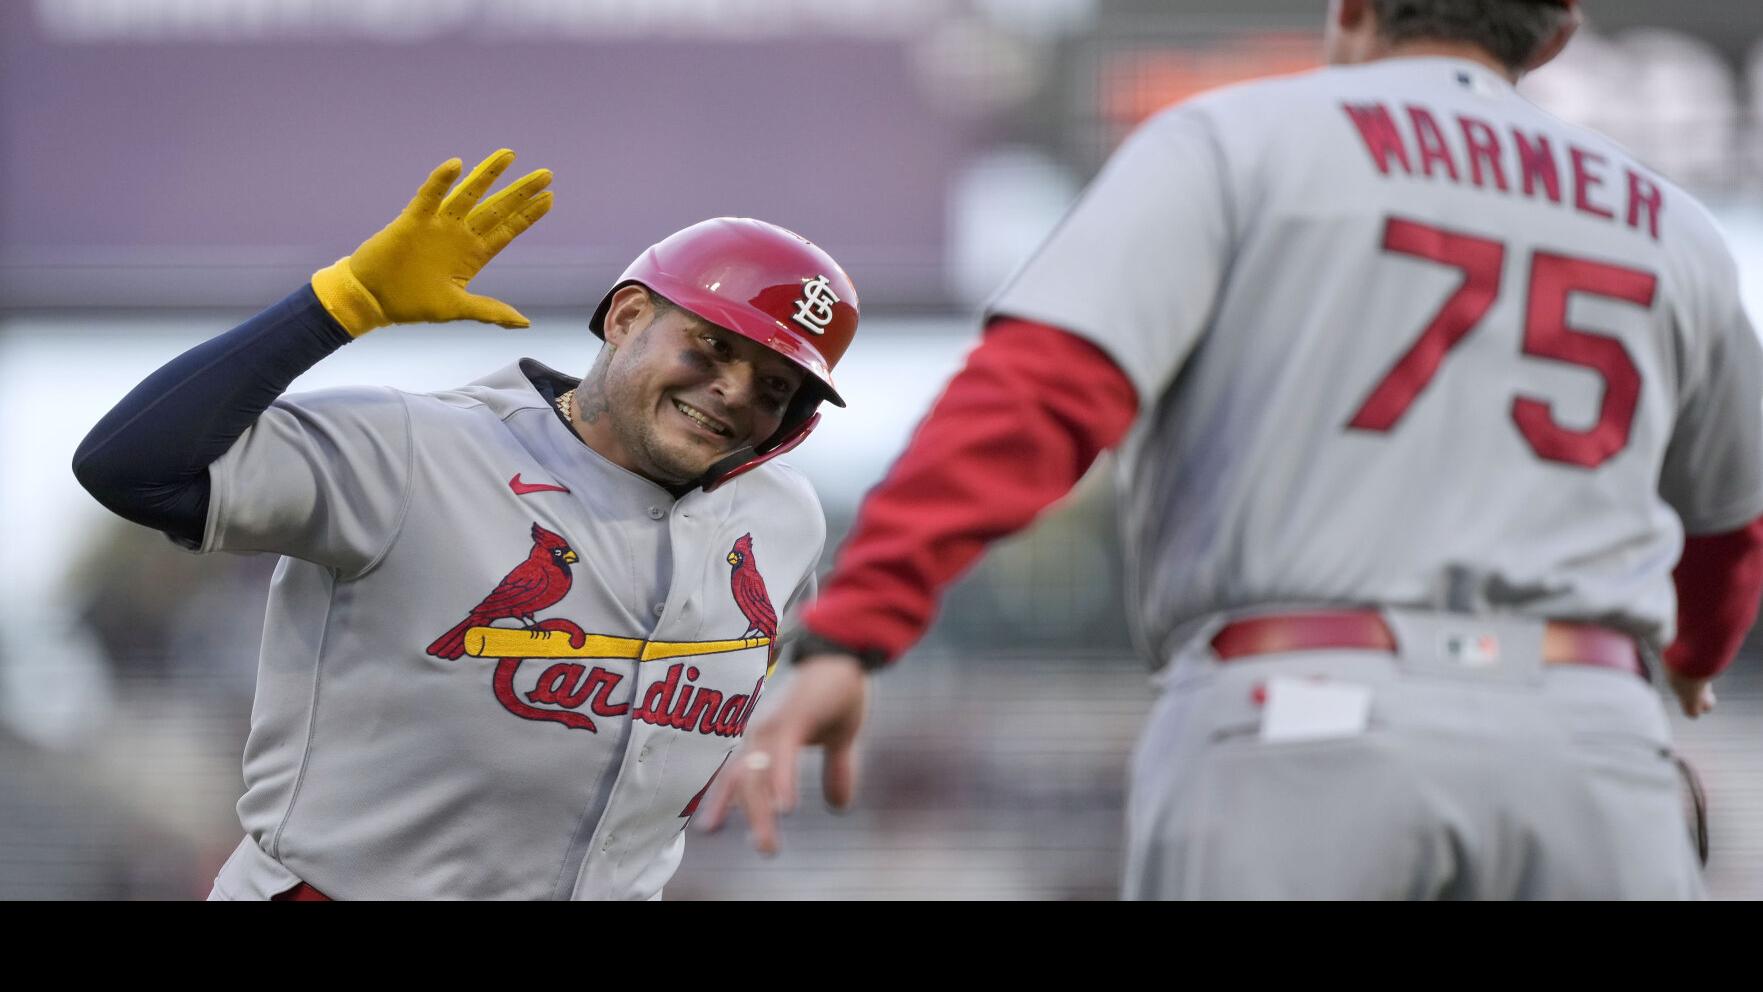 Molina's first homer of season starts Cardinals' 7-1 romp against nine Giants' pitchers